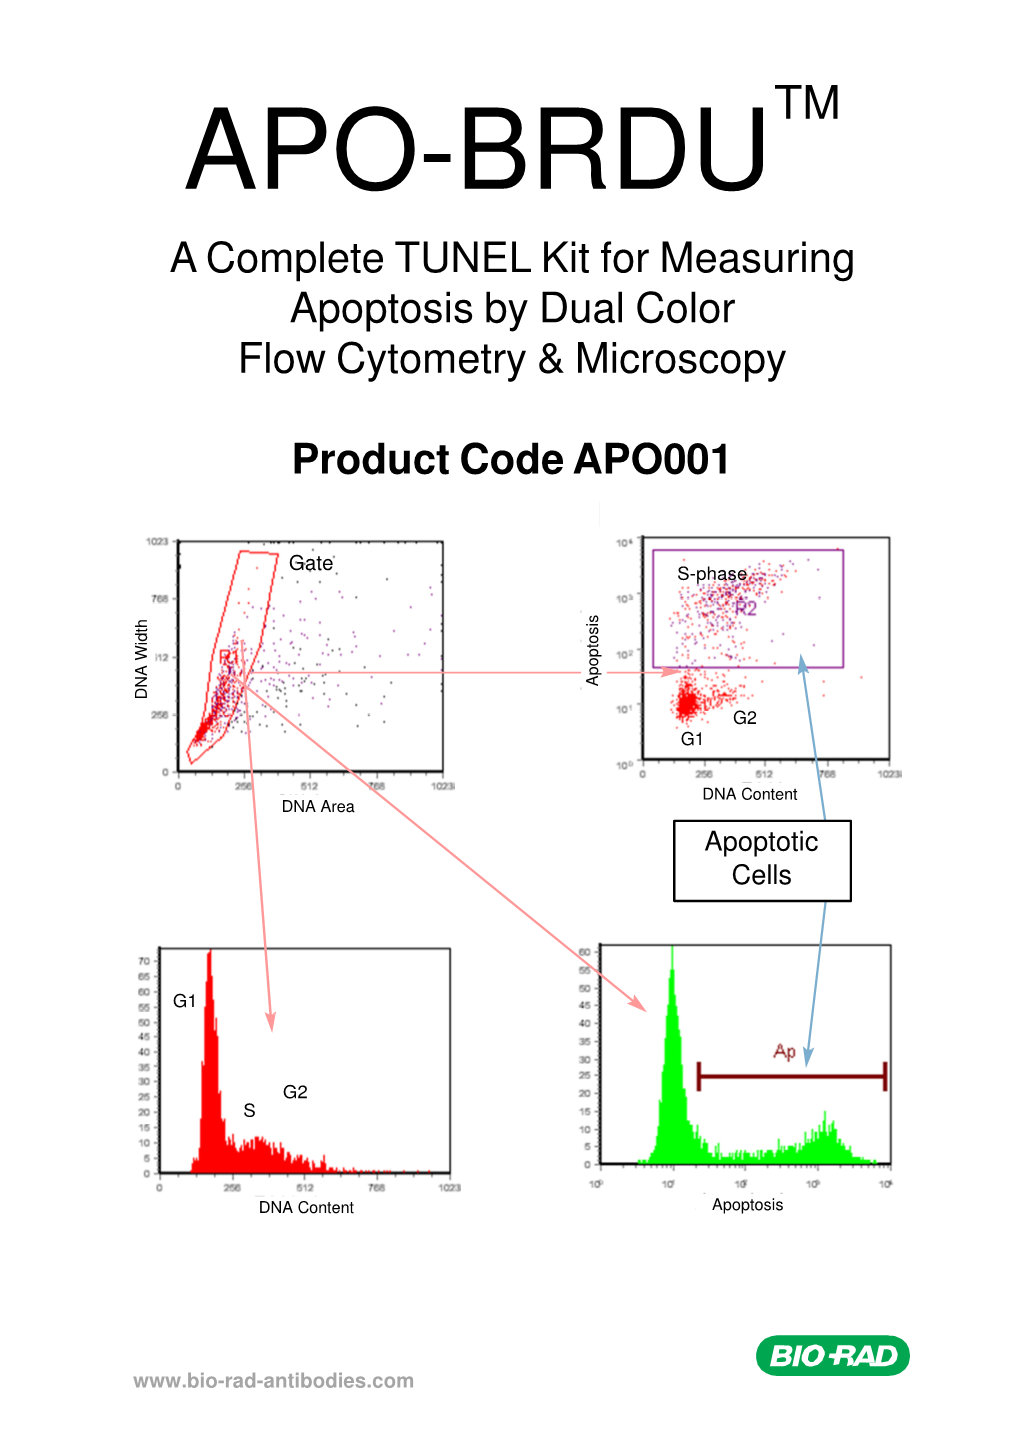 APO-BRDU TM a Complete TUNEL Kit for Measuring Apoptosis by Dual Color Flow Cytometry & Microscopy